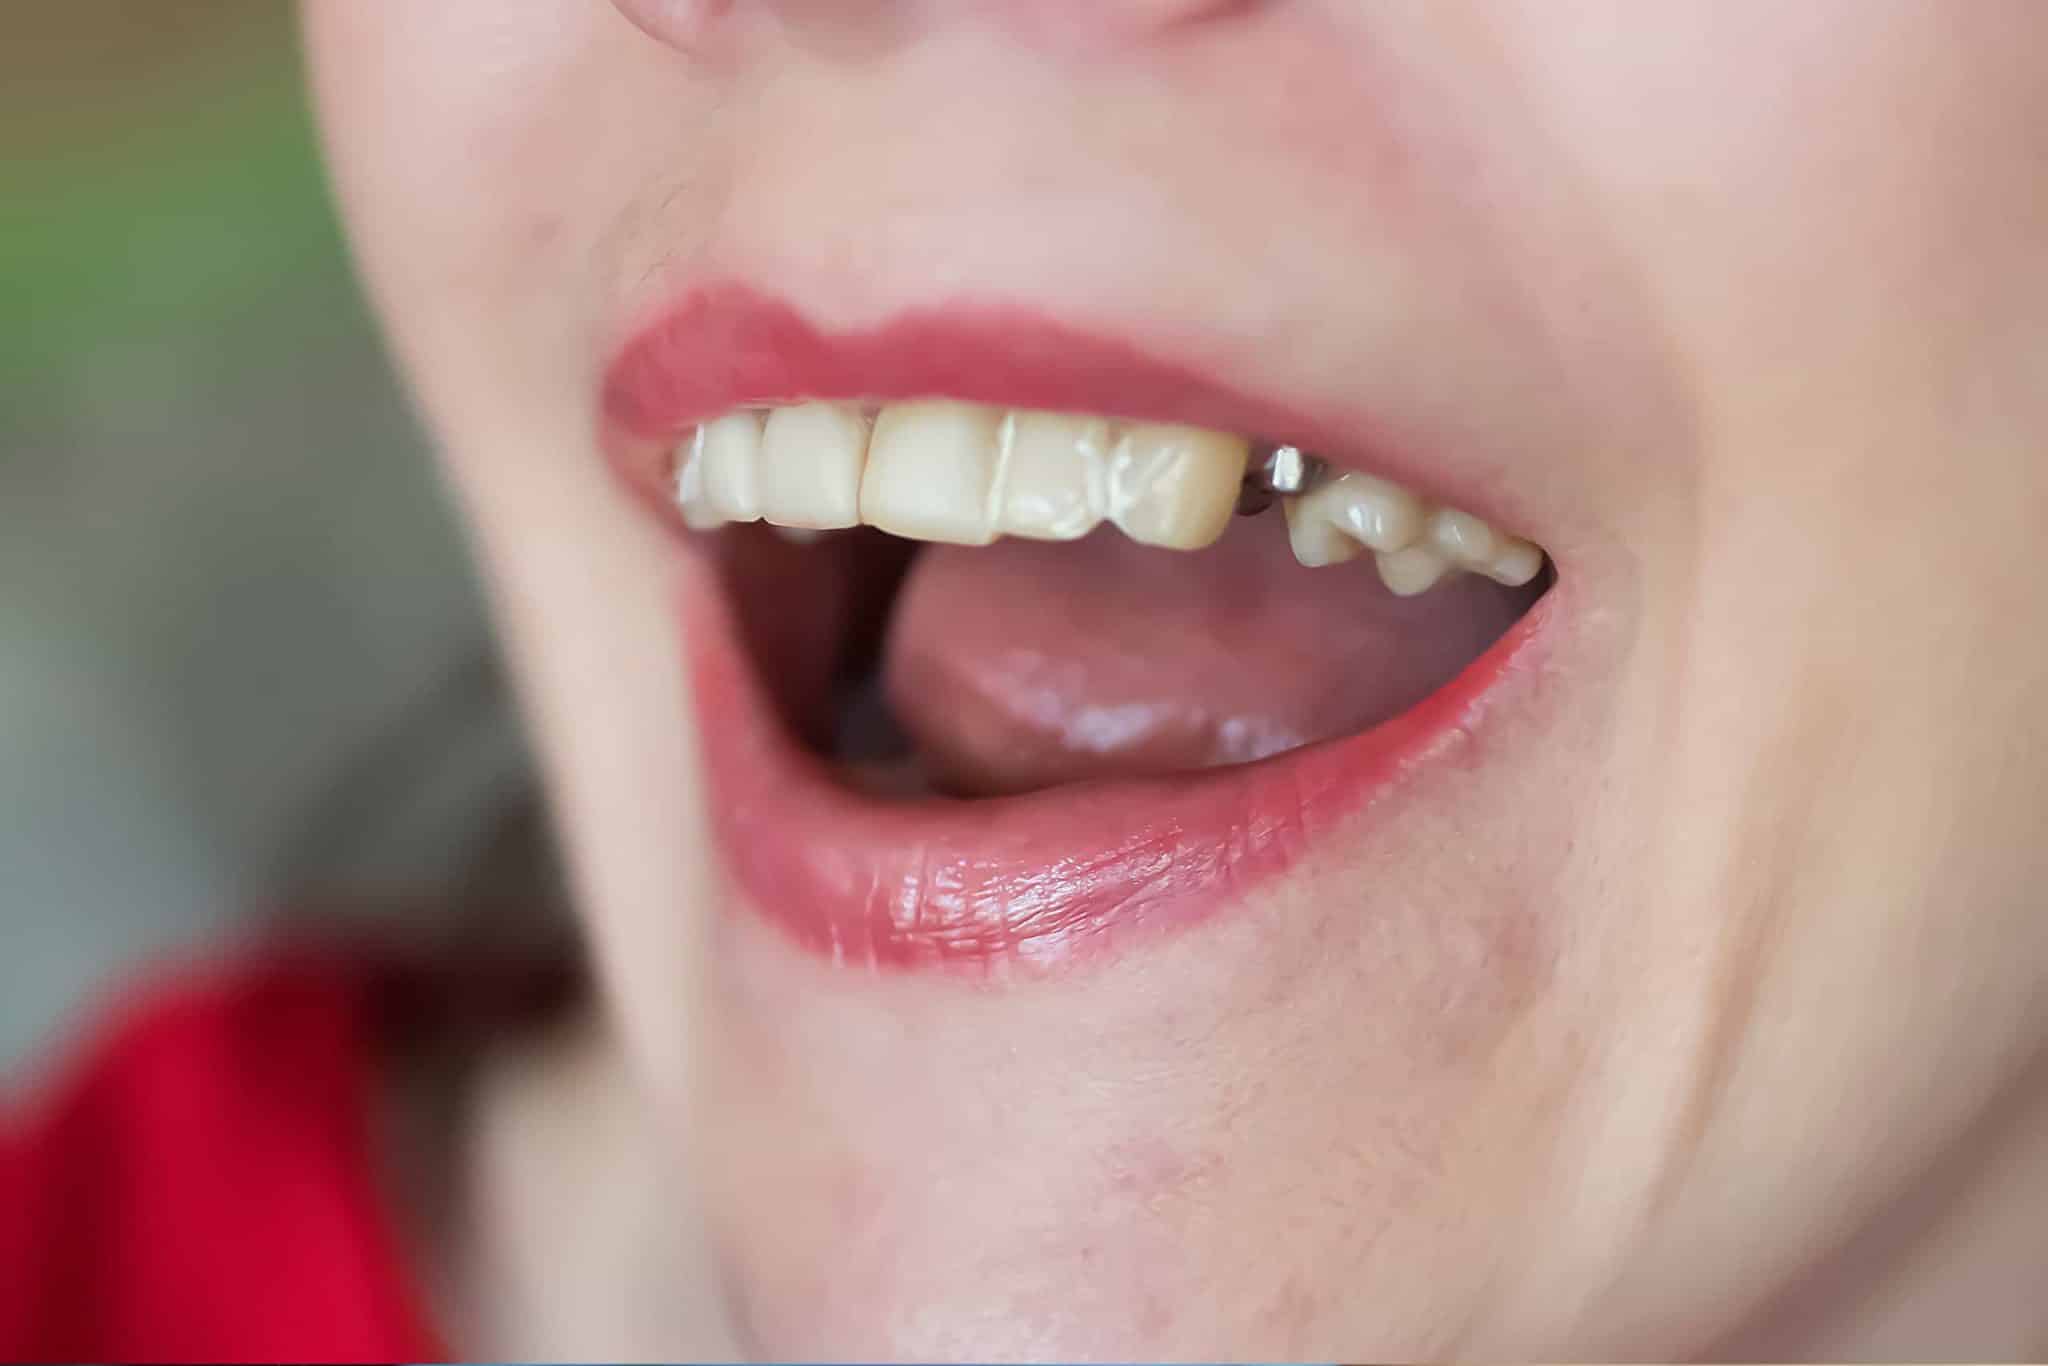 A picture of a woman with a dental implant anchor, but no tooth placed yet.